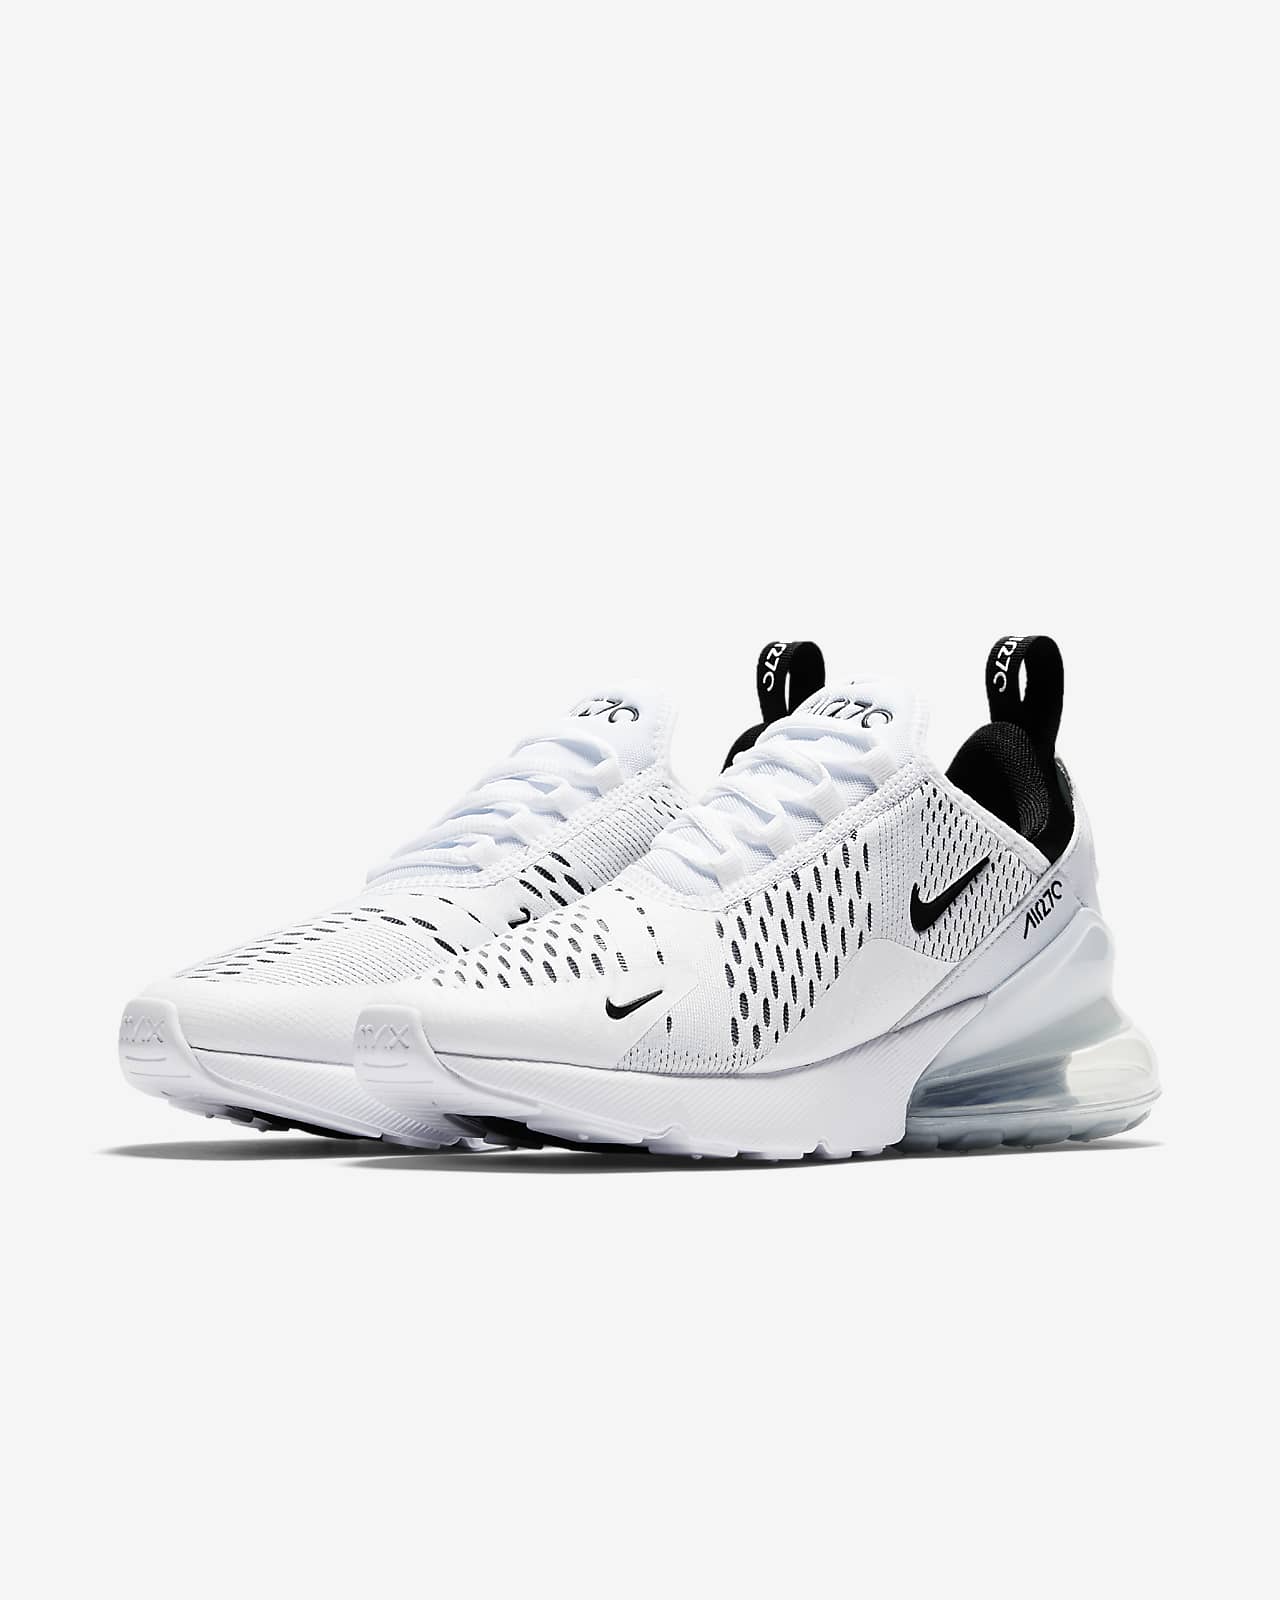 Nike Wmns Air Max 270 Barely Rose Pink White Women Casual Lifestyle  AH6789-601